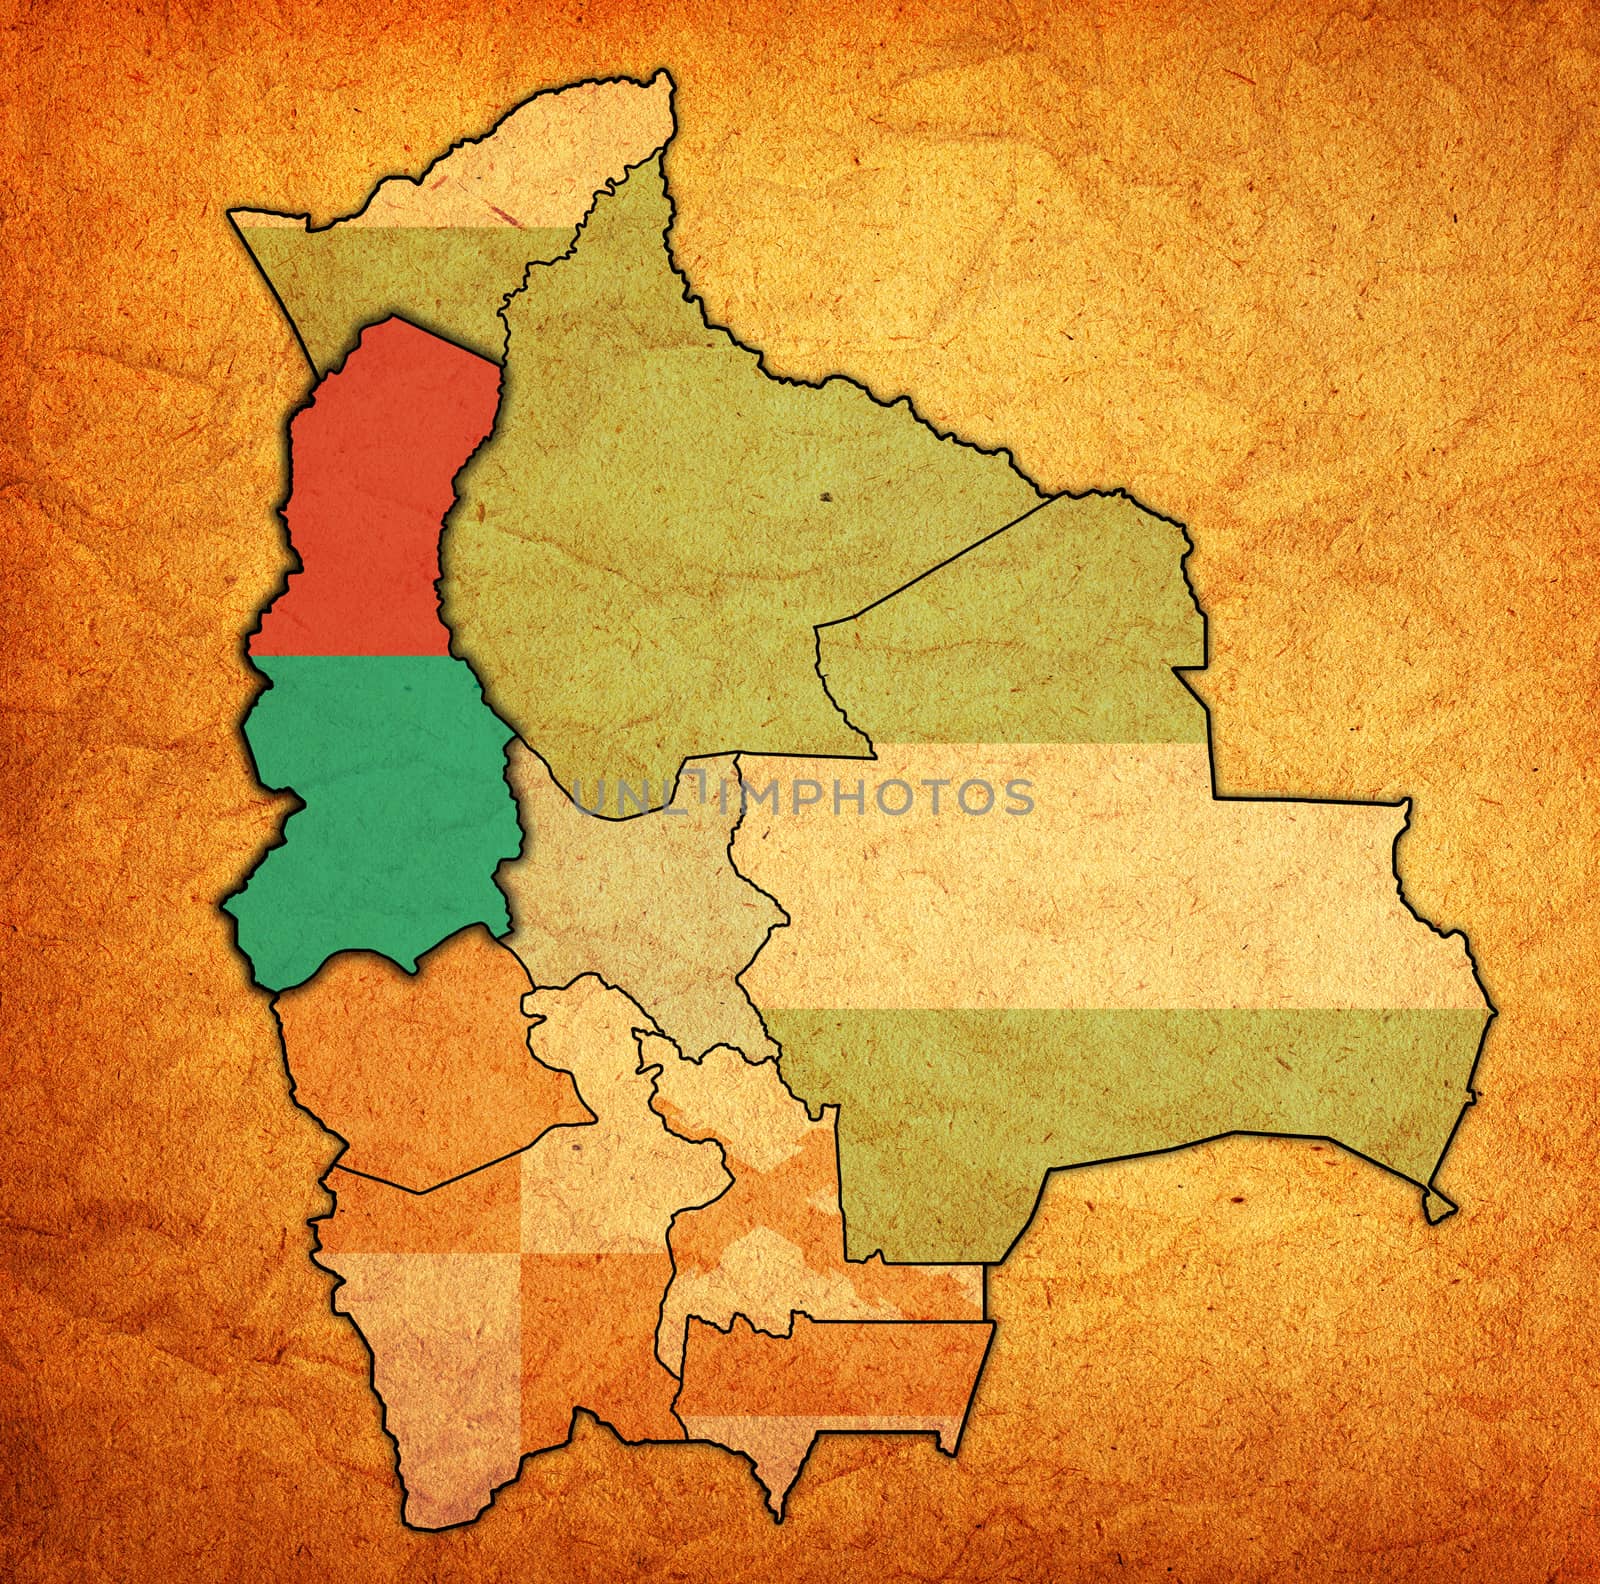 territory and flag of La Paz region on map with administrative divisions and borders of Bolivia with clipping path